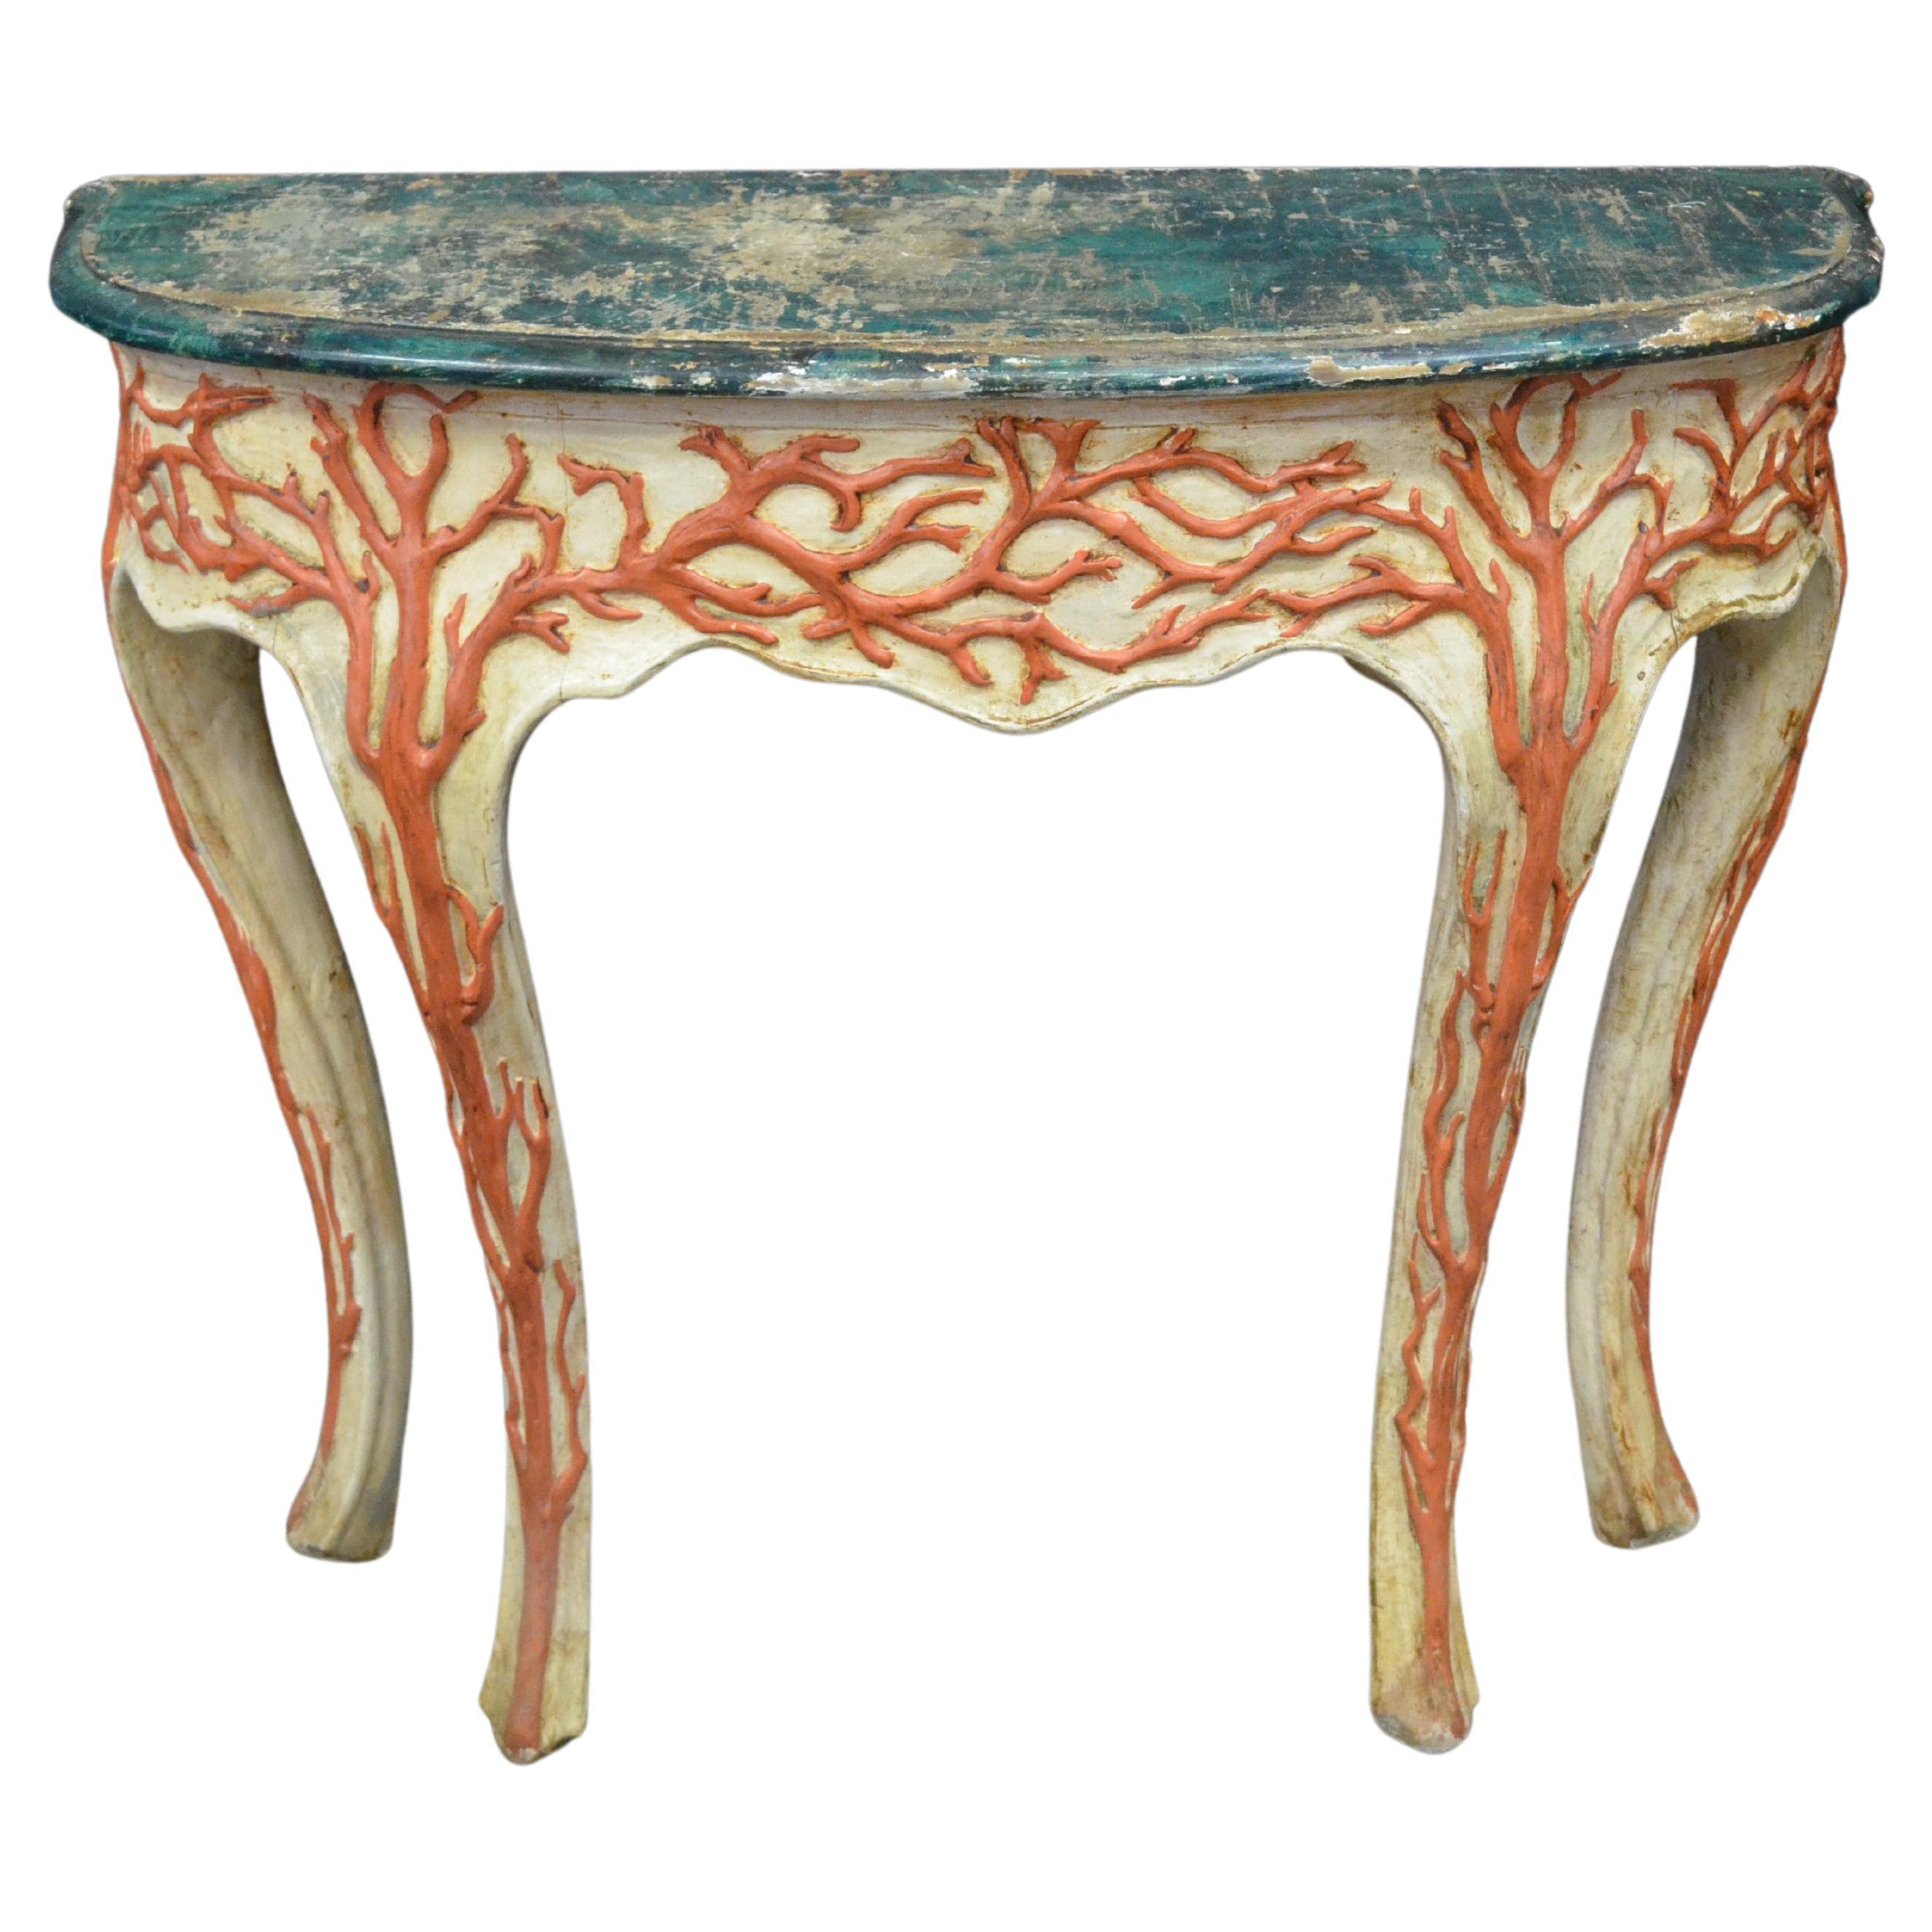 Italian Cabriole Leg Console with Carved Faux Coral Motifs & Faux Marble Top